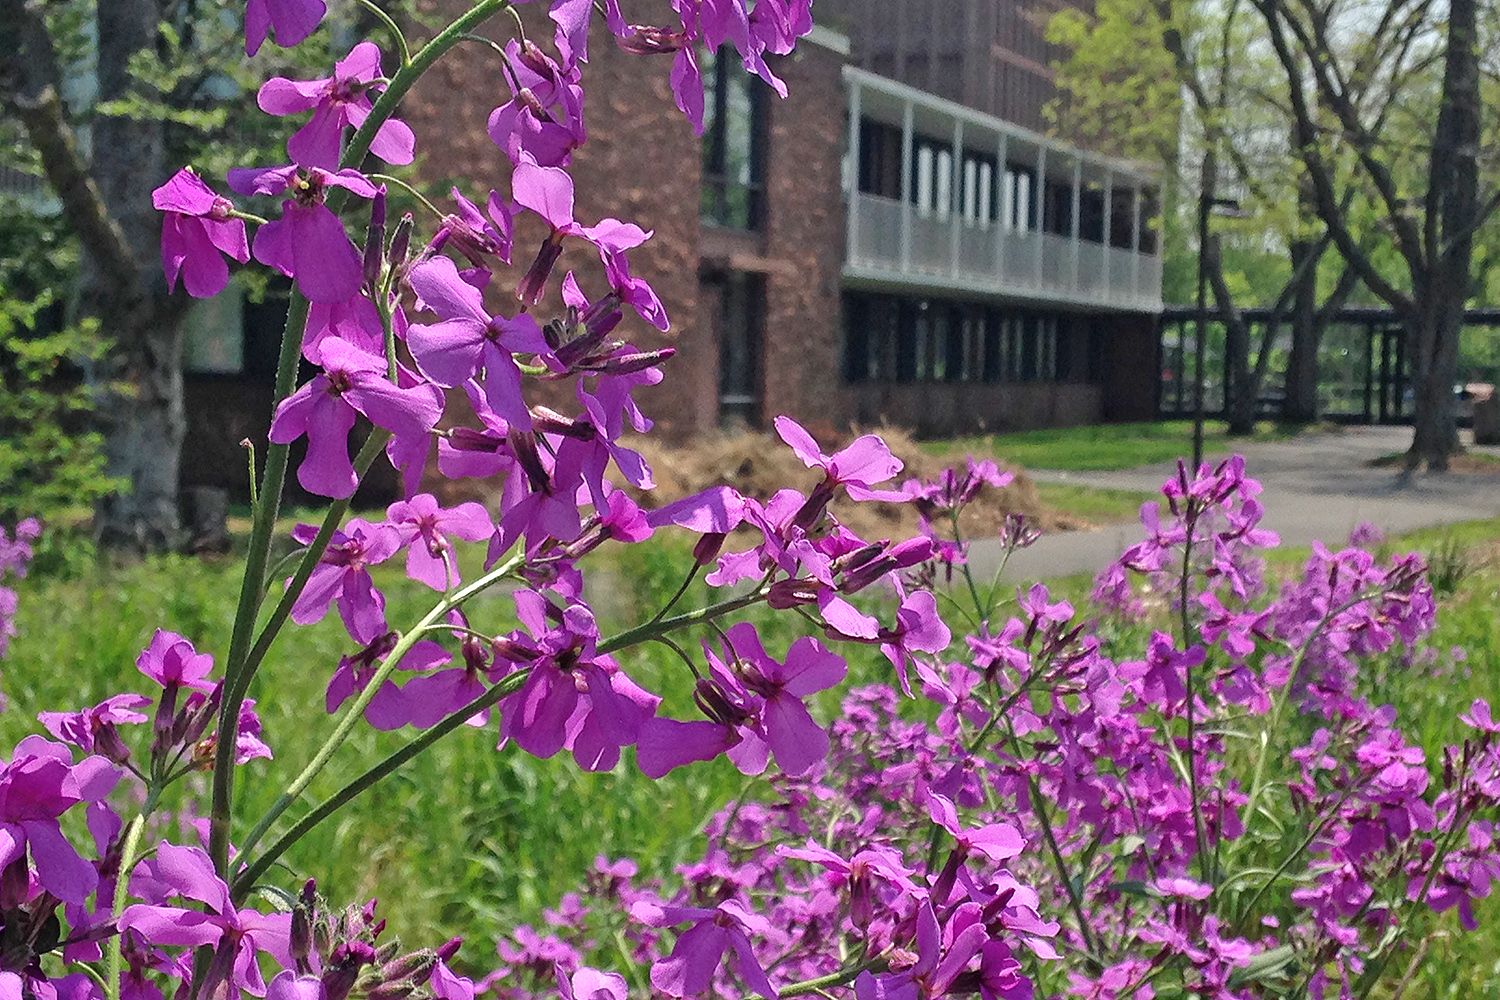 Phlox blooms near the West College residences.